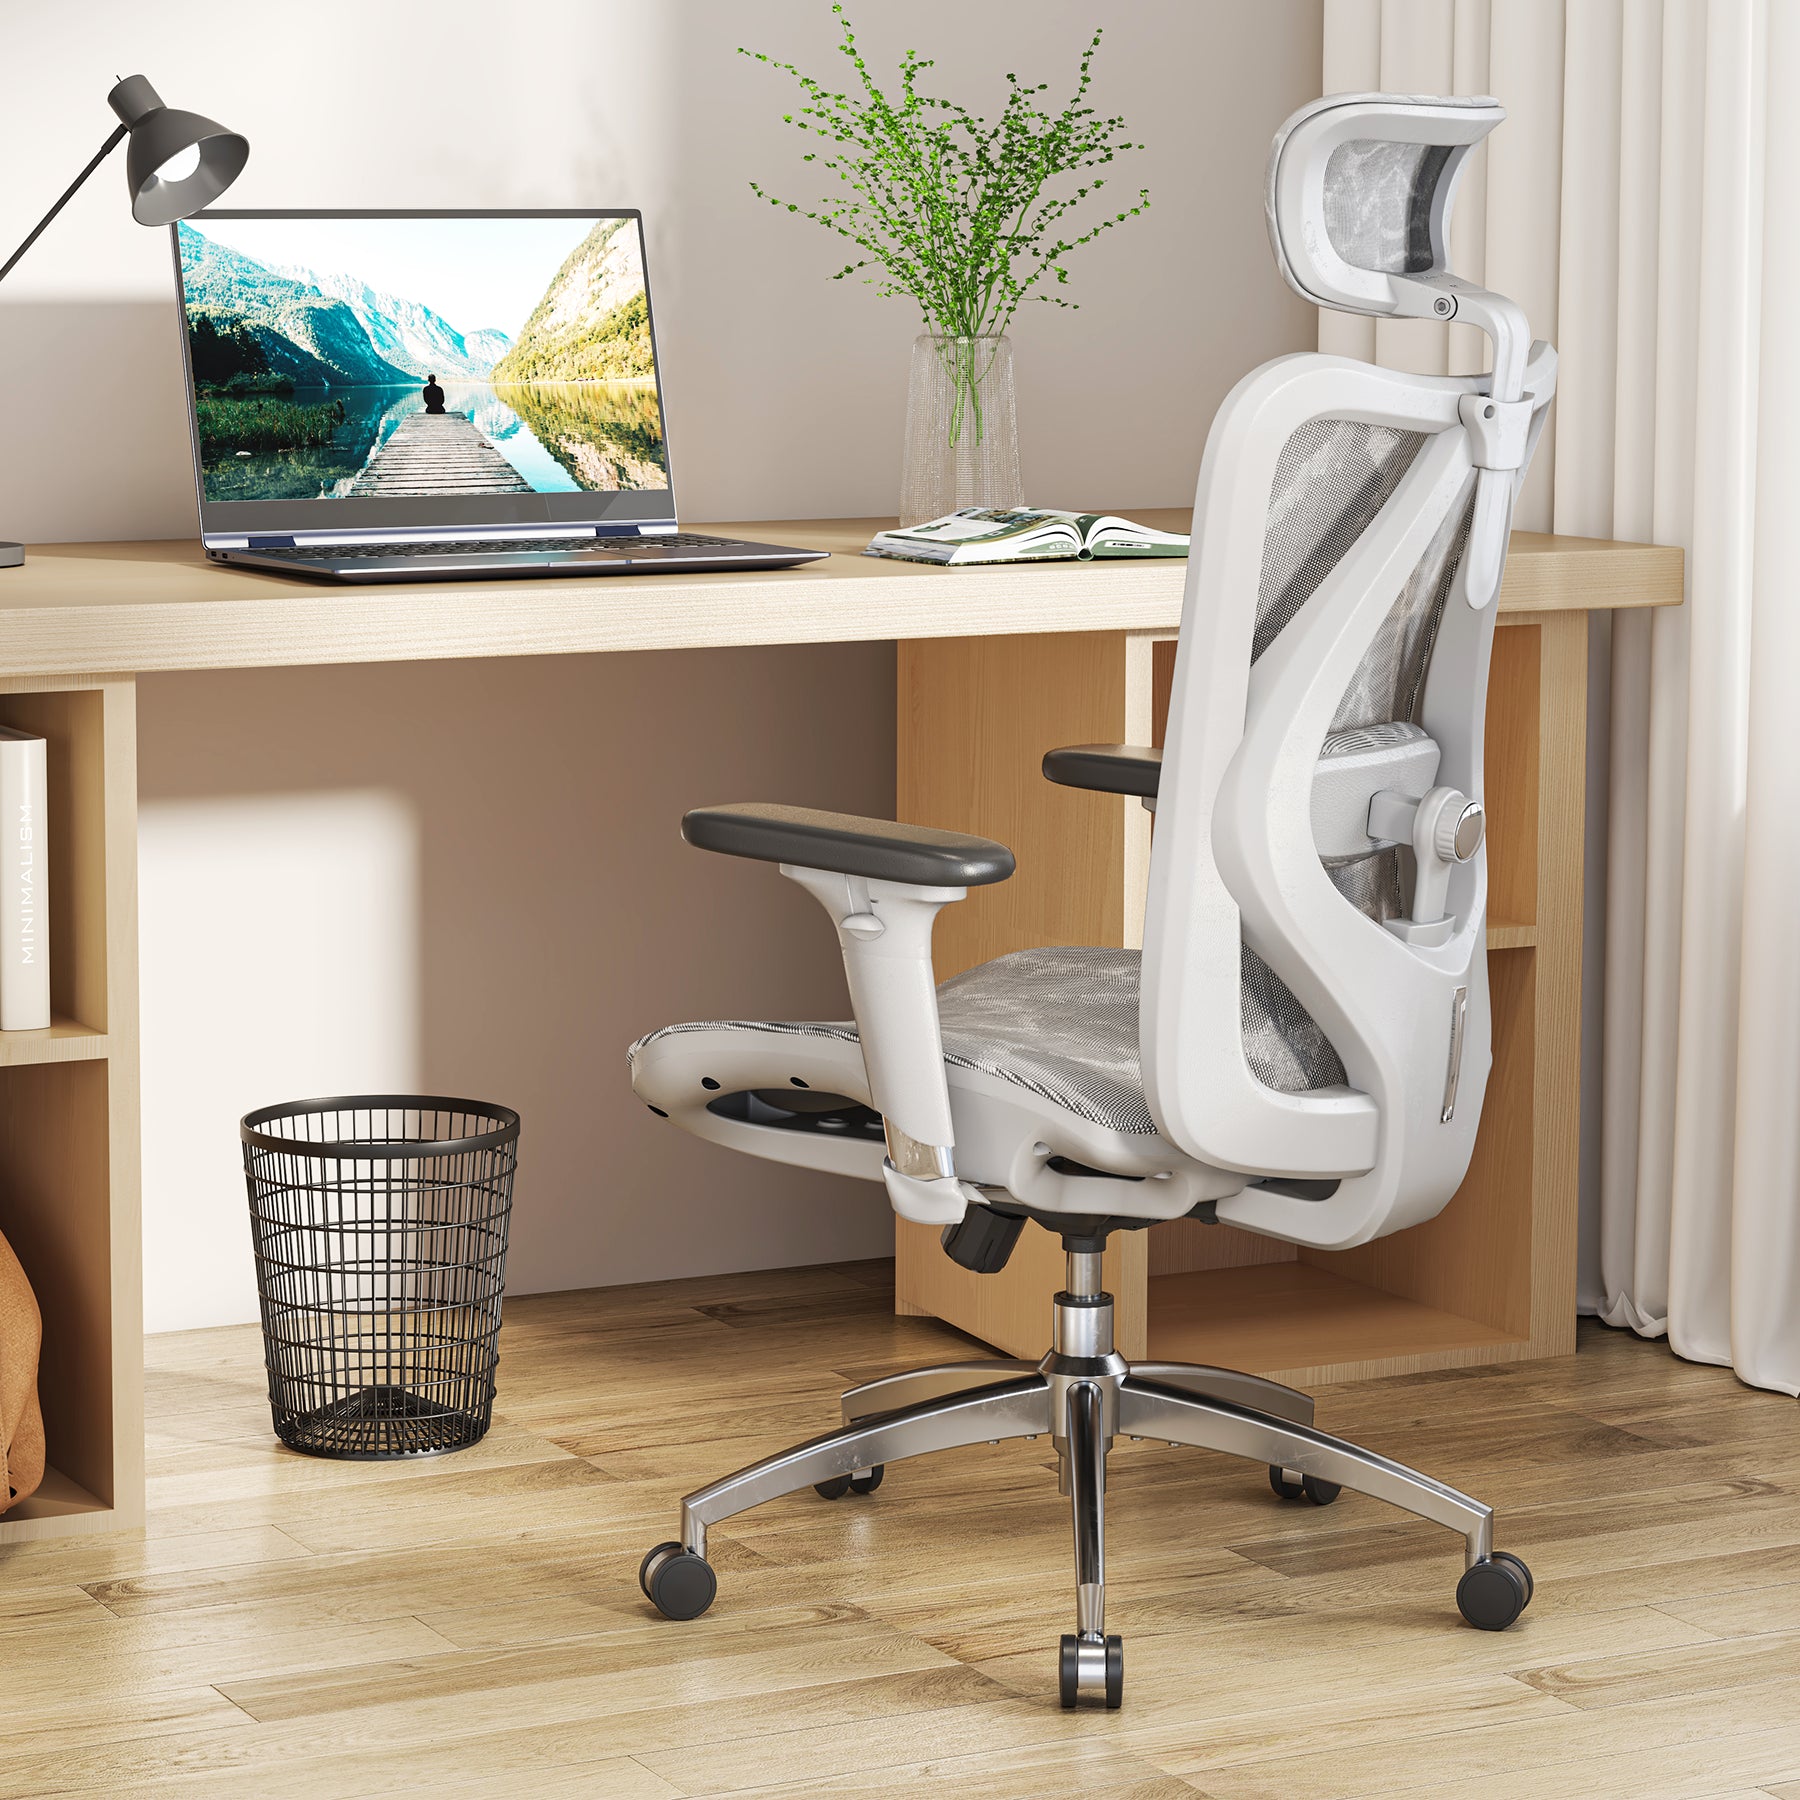 Sihoo M57 Full Mesh Breathable Office Chair for Sedentary Lifestyle